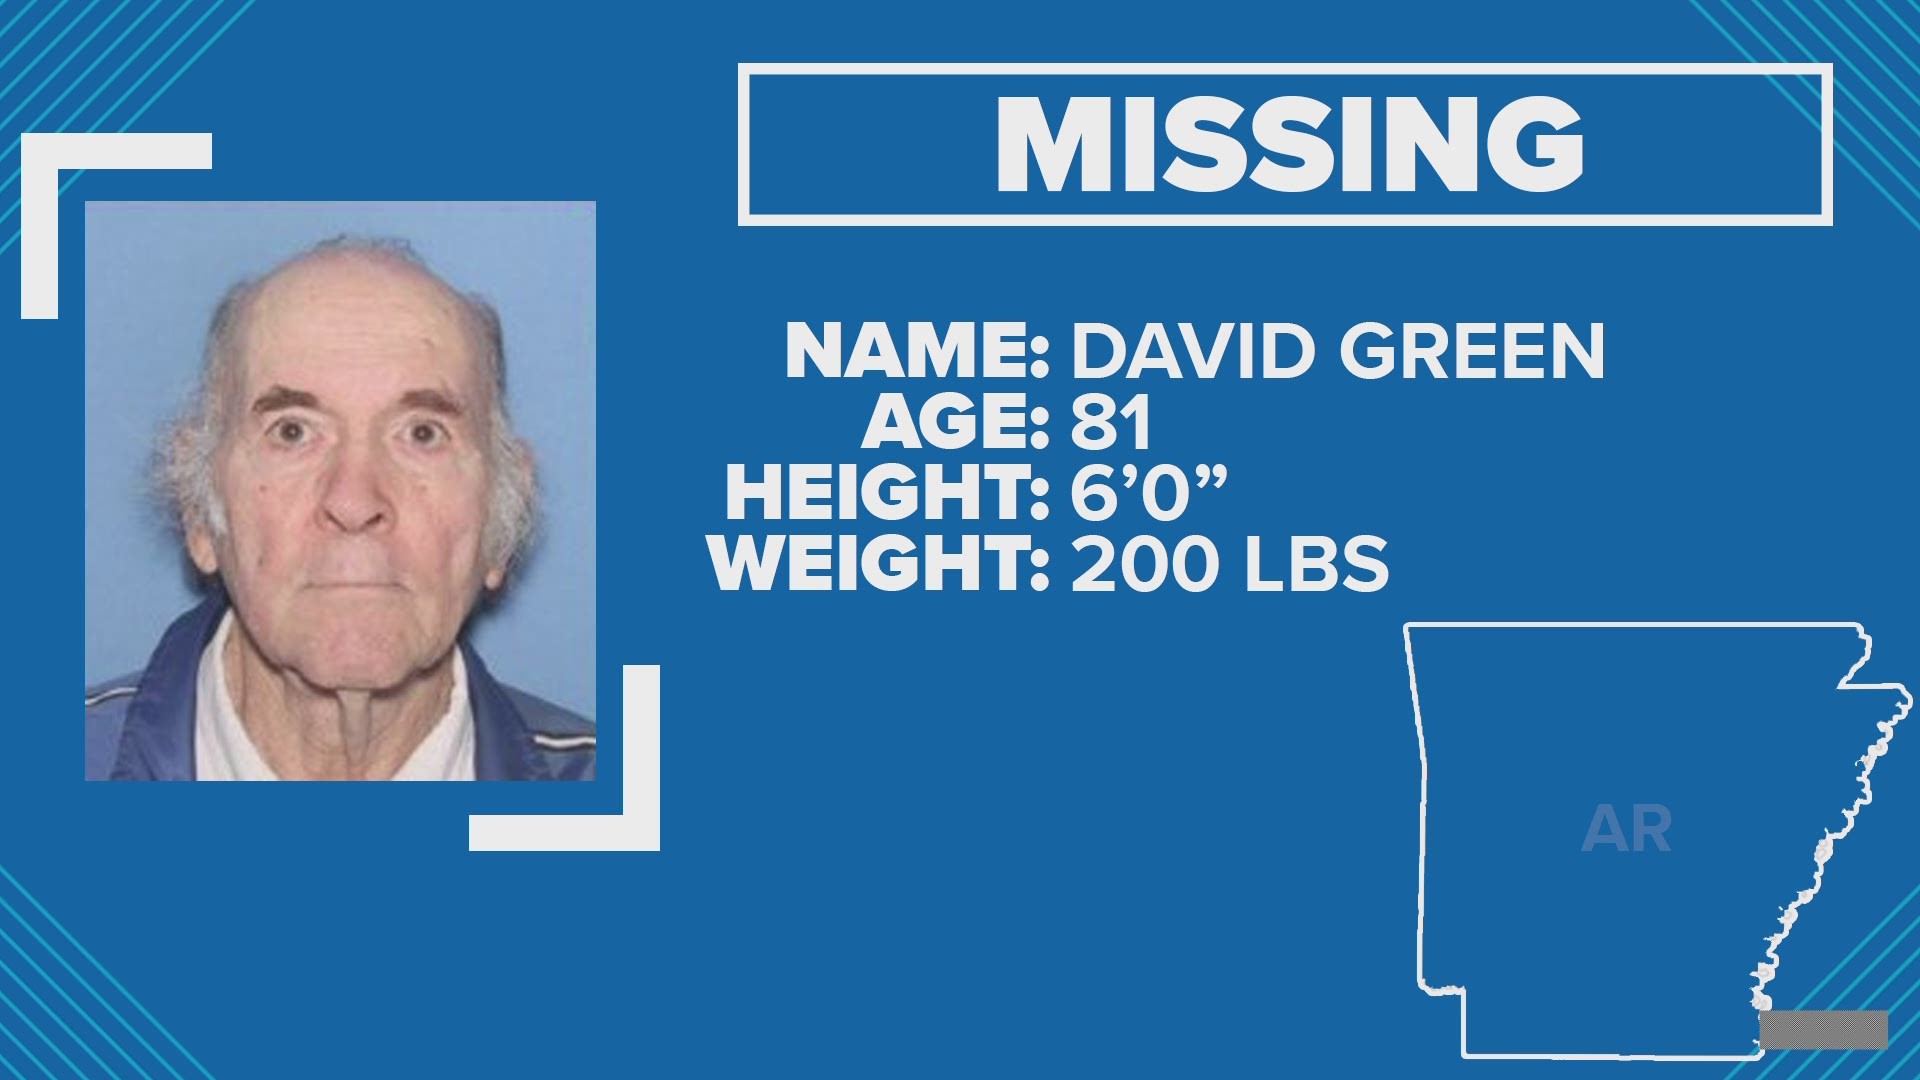 If you have any information on where Green is, please contact the Perry County Sheriff's Office at 501-889-2333.